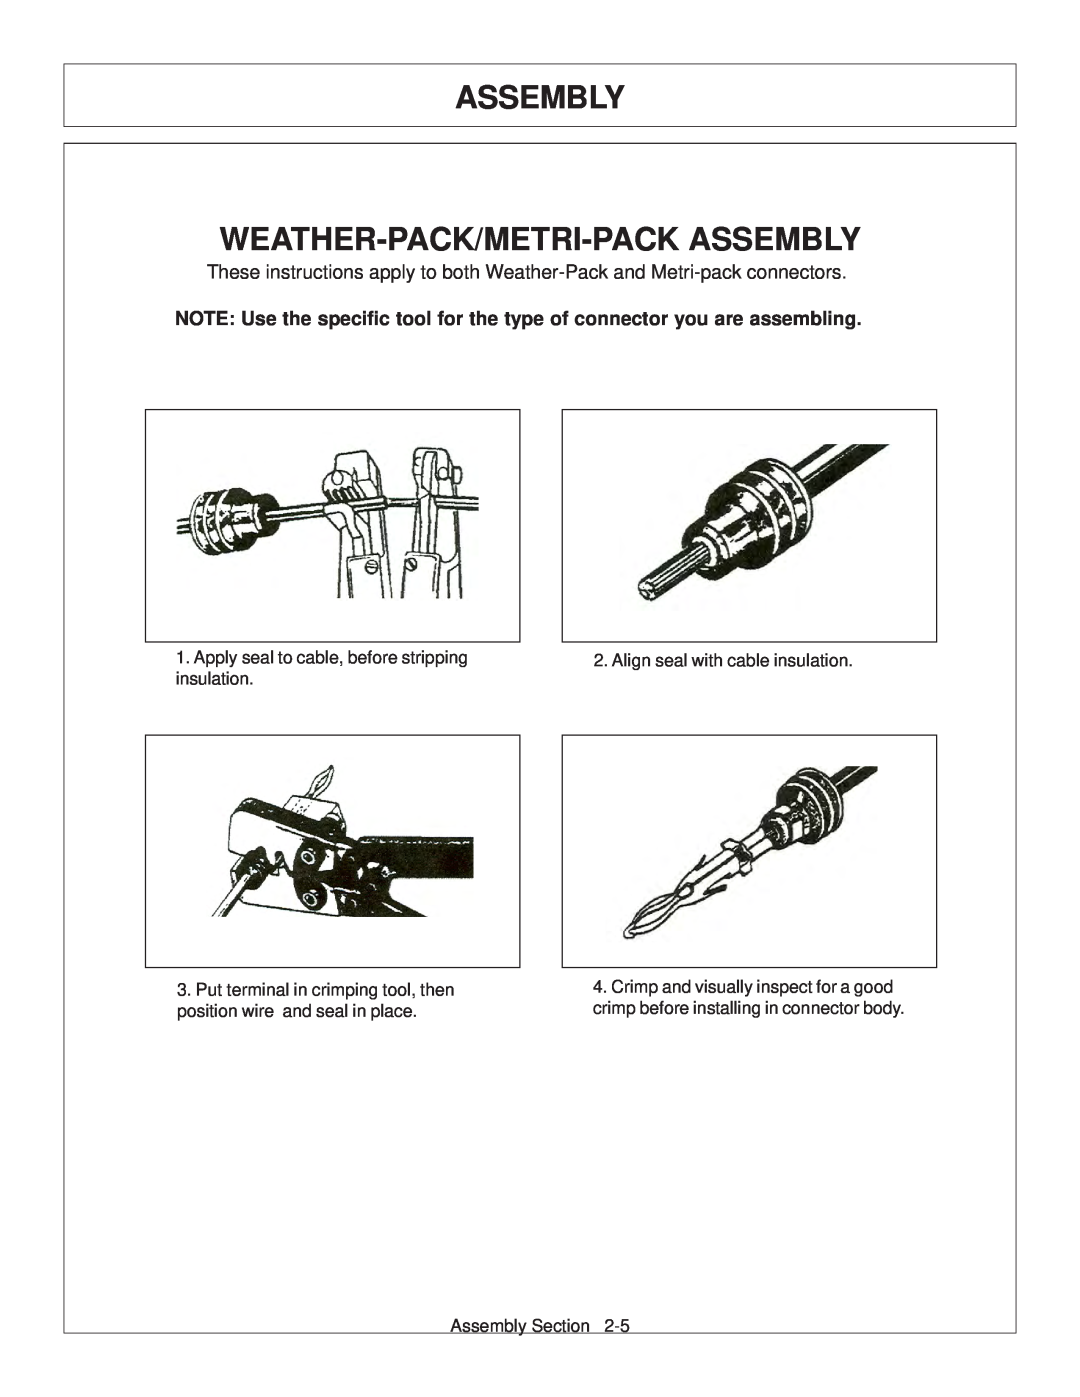 Tiger Products Co., Ltd 6020009 manual Weather-Pack/Metri-Pack Assembly 